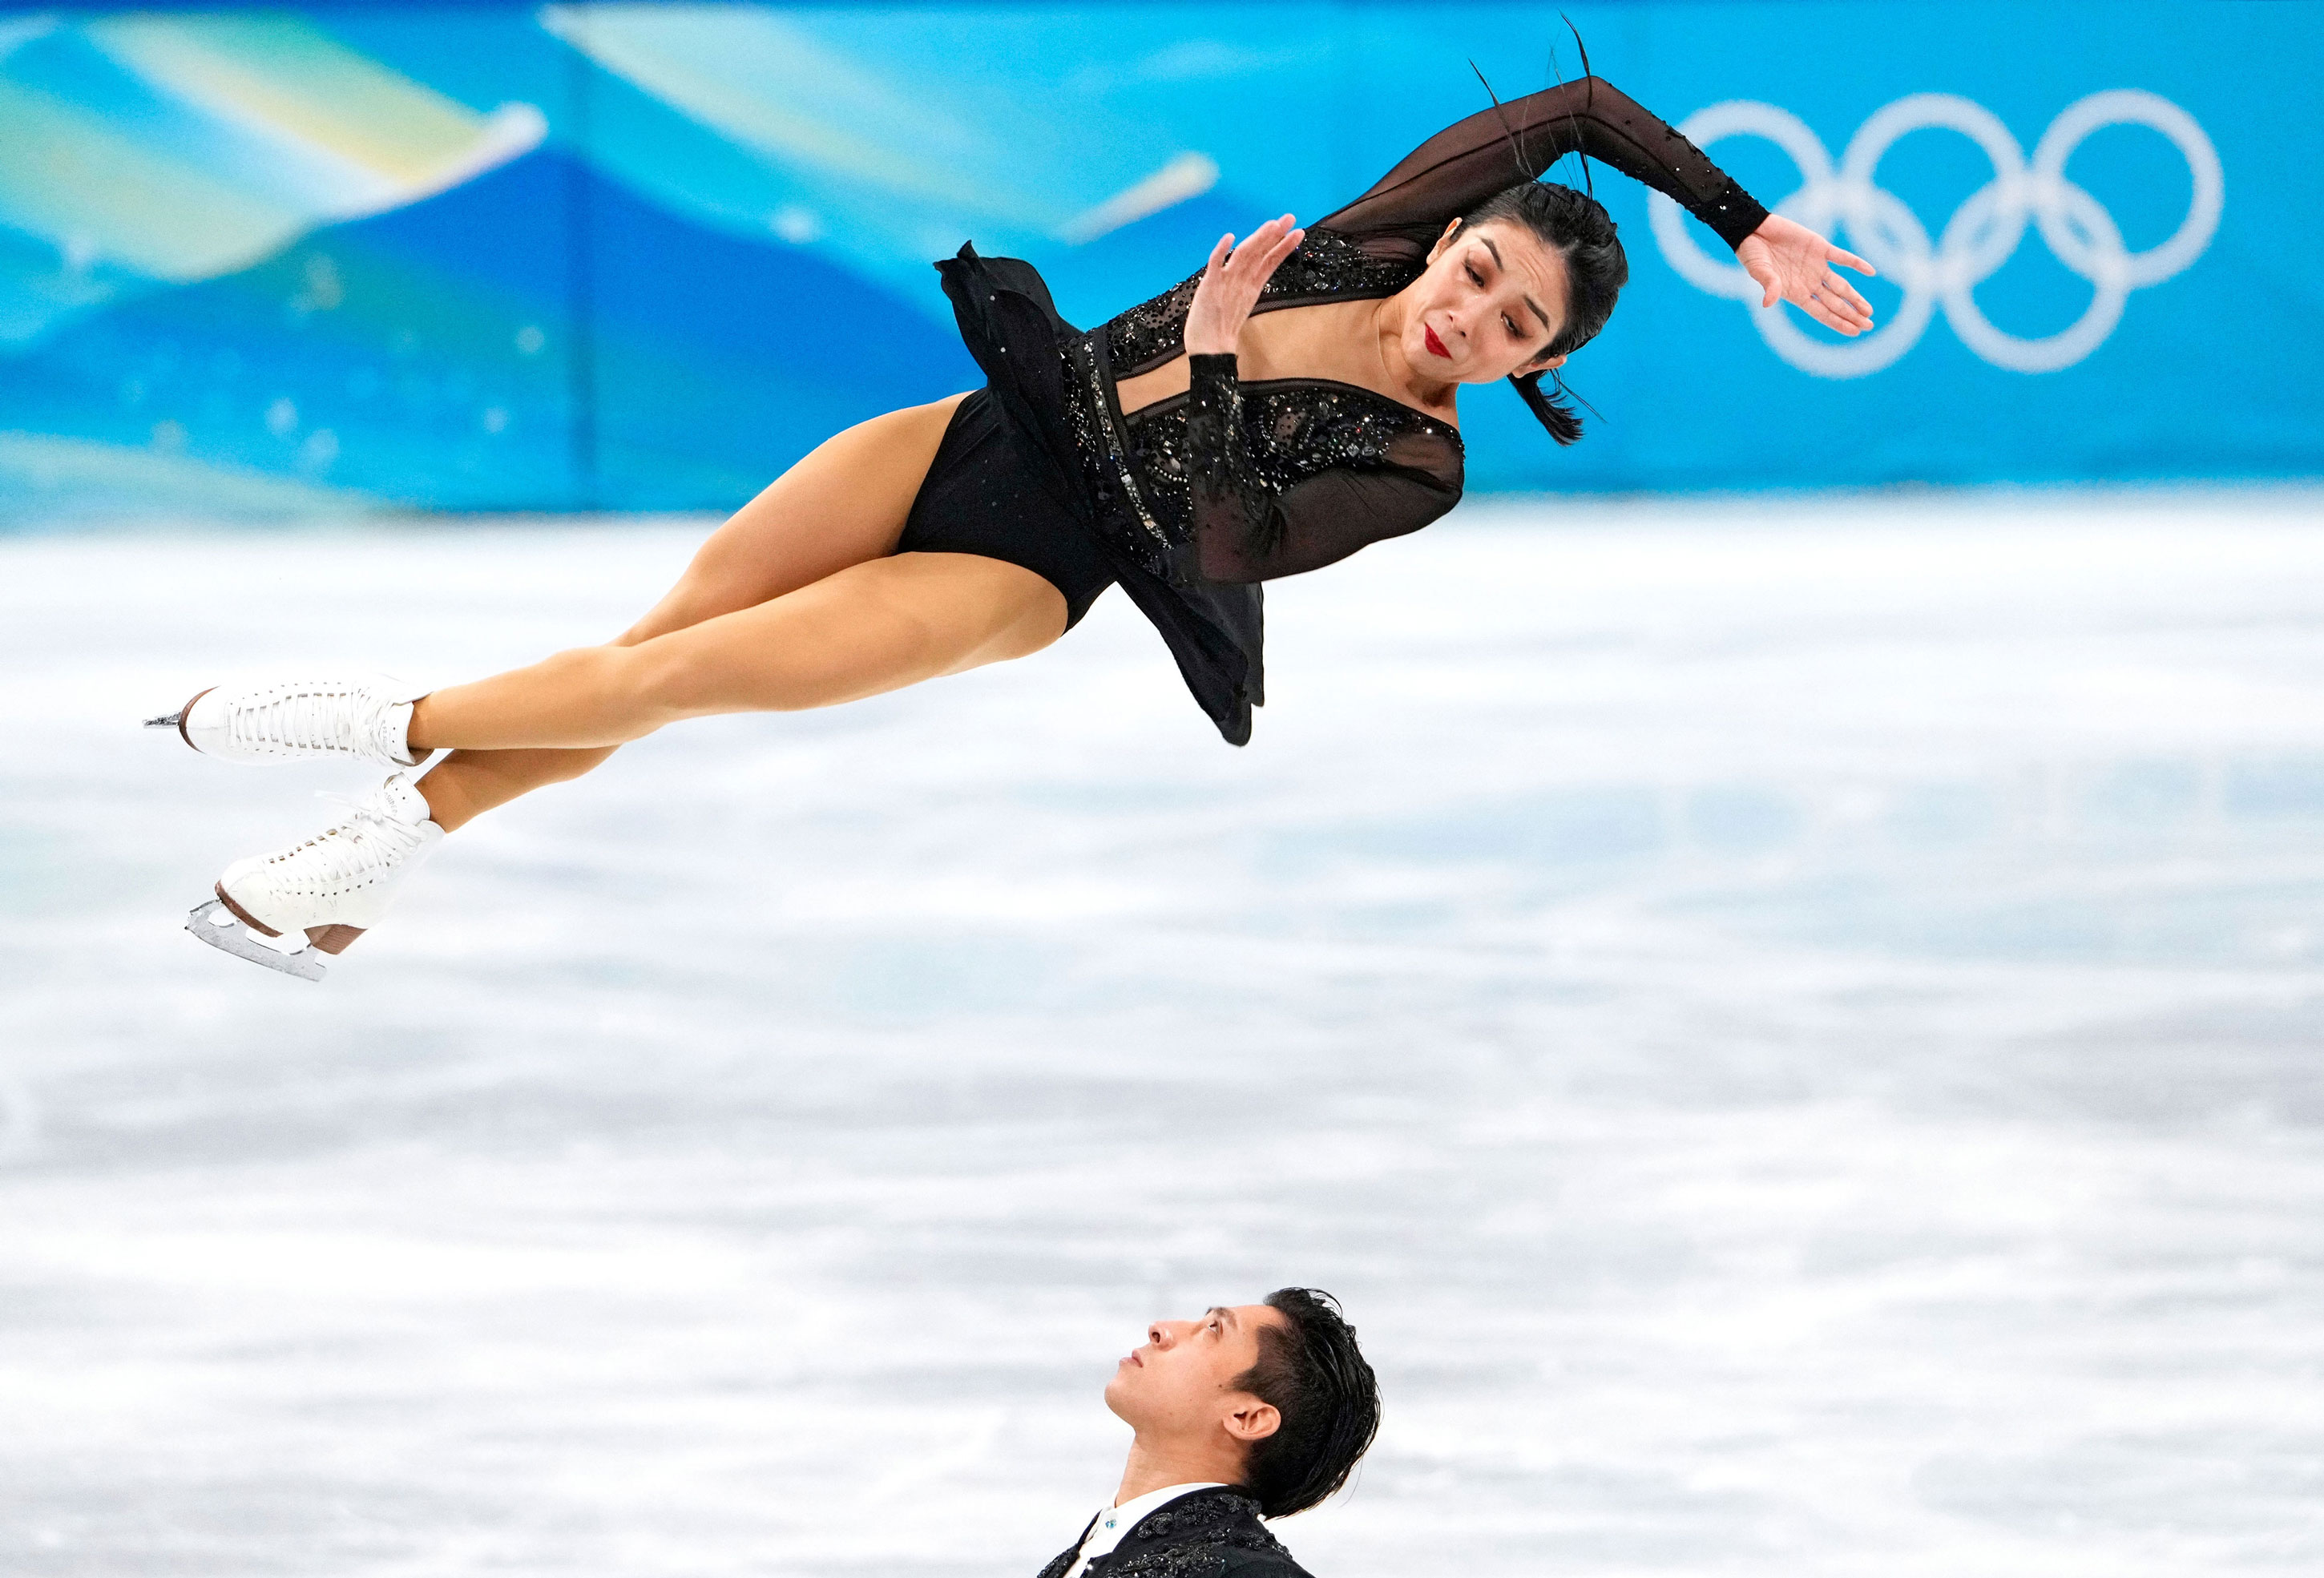 China's Wenjing Sui and Cong Han compete in the figure skating team pairs short program on Friday.